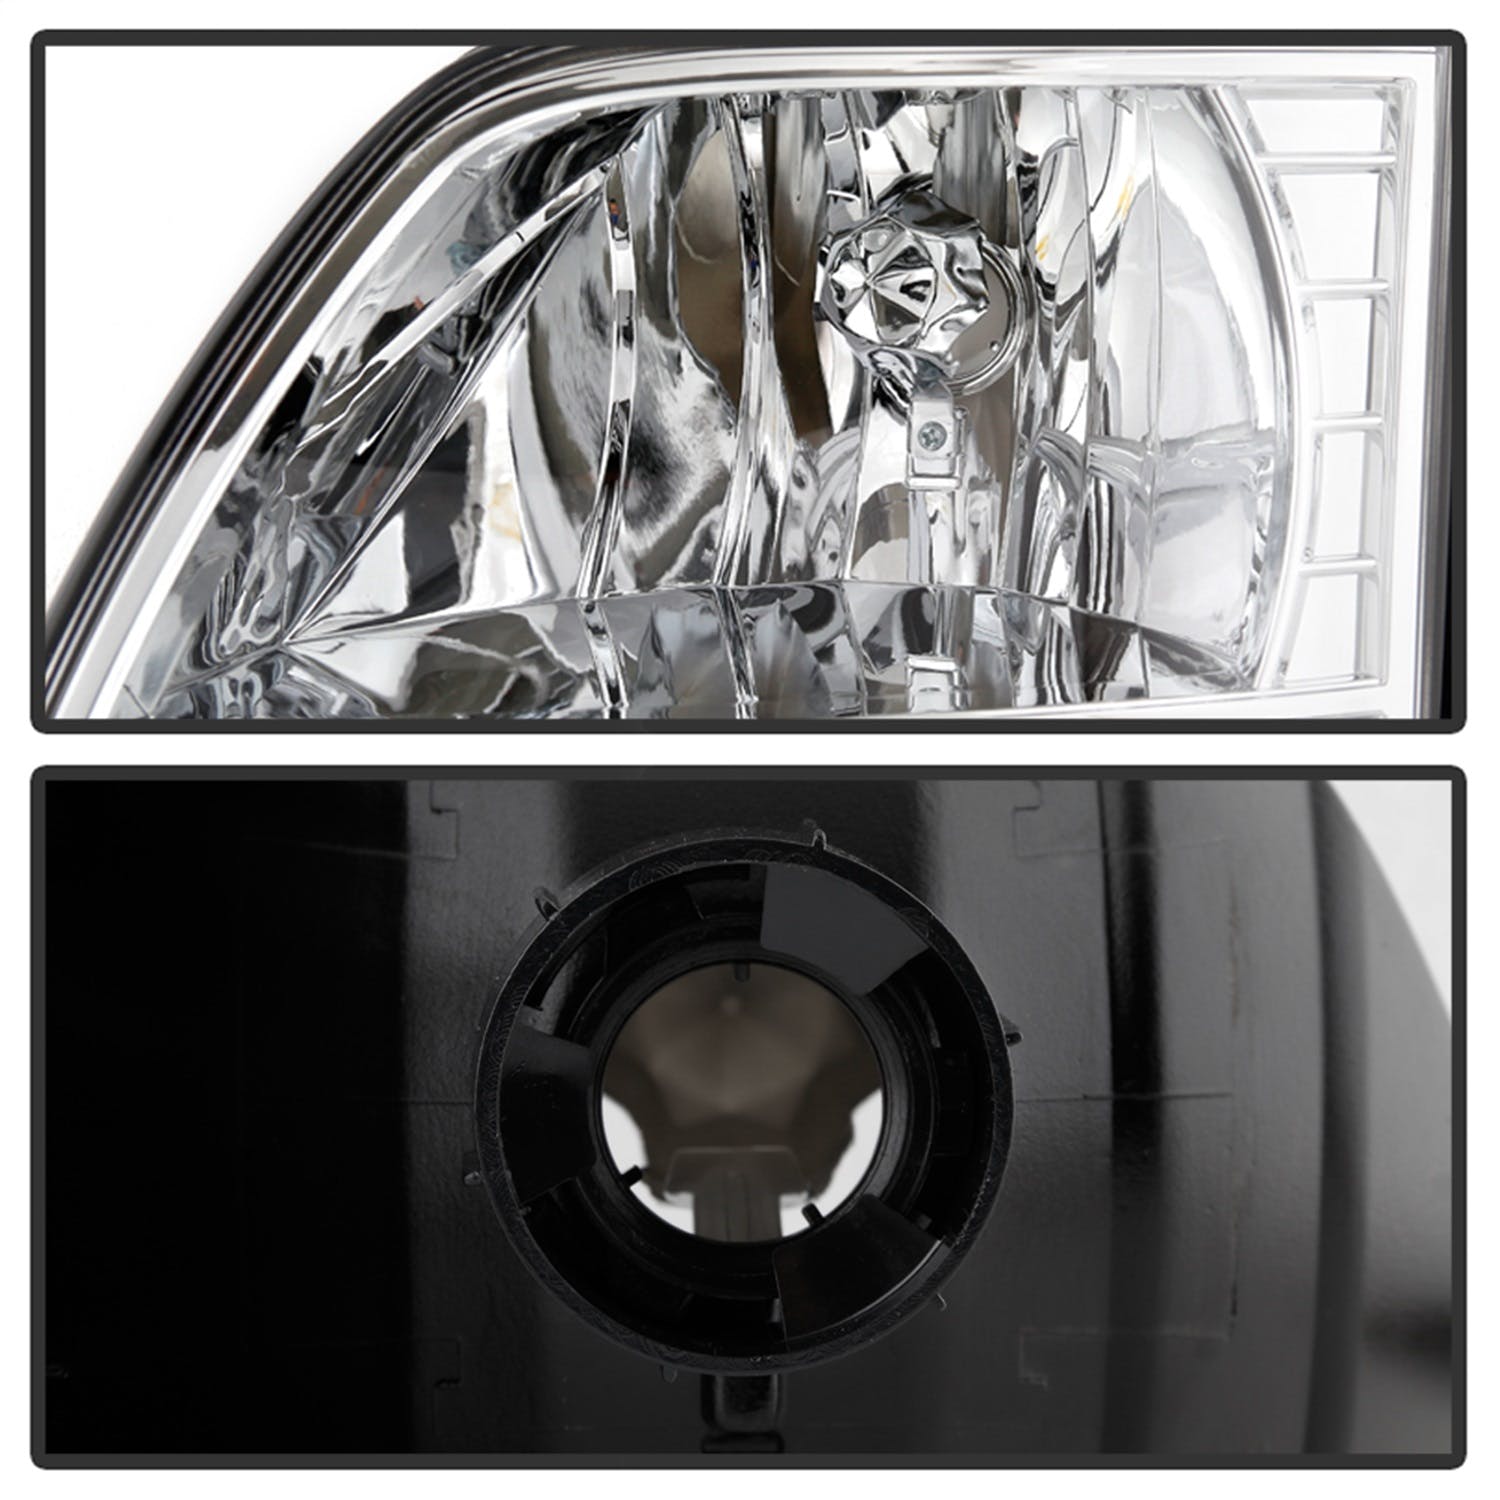 XTUNE POWER 5014191 Ford F150 97 03 Expedition 97 02 ( Will Not Fit Anything Before Manu. Date June 1997 ) Crystal Headlights with Clear LED Corners Chrome